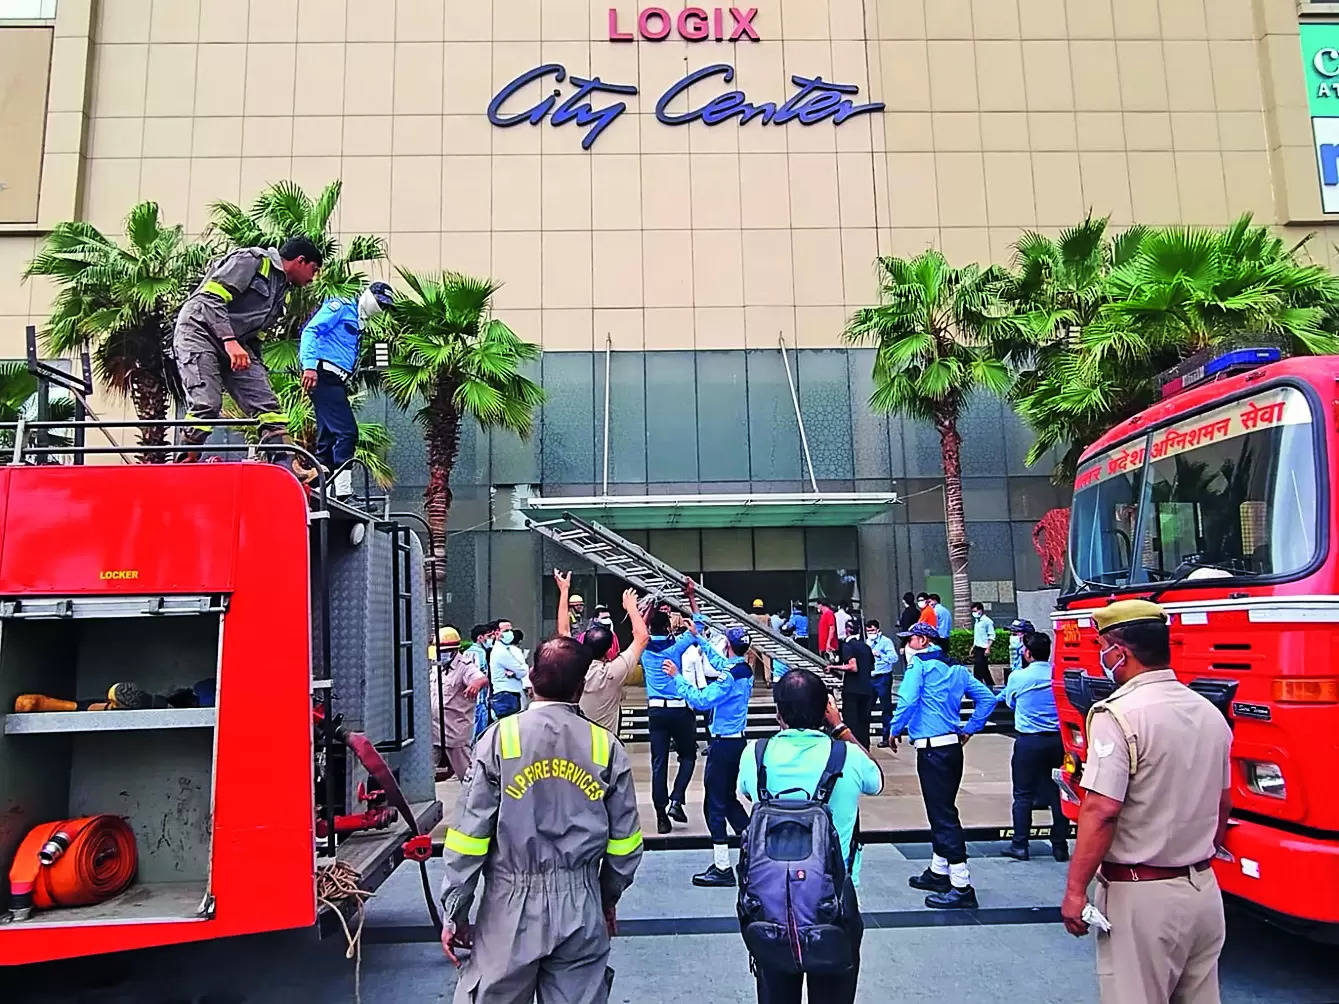 Sparked by short circuit? Fire breaks out at Noida's Logix mall